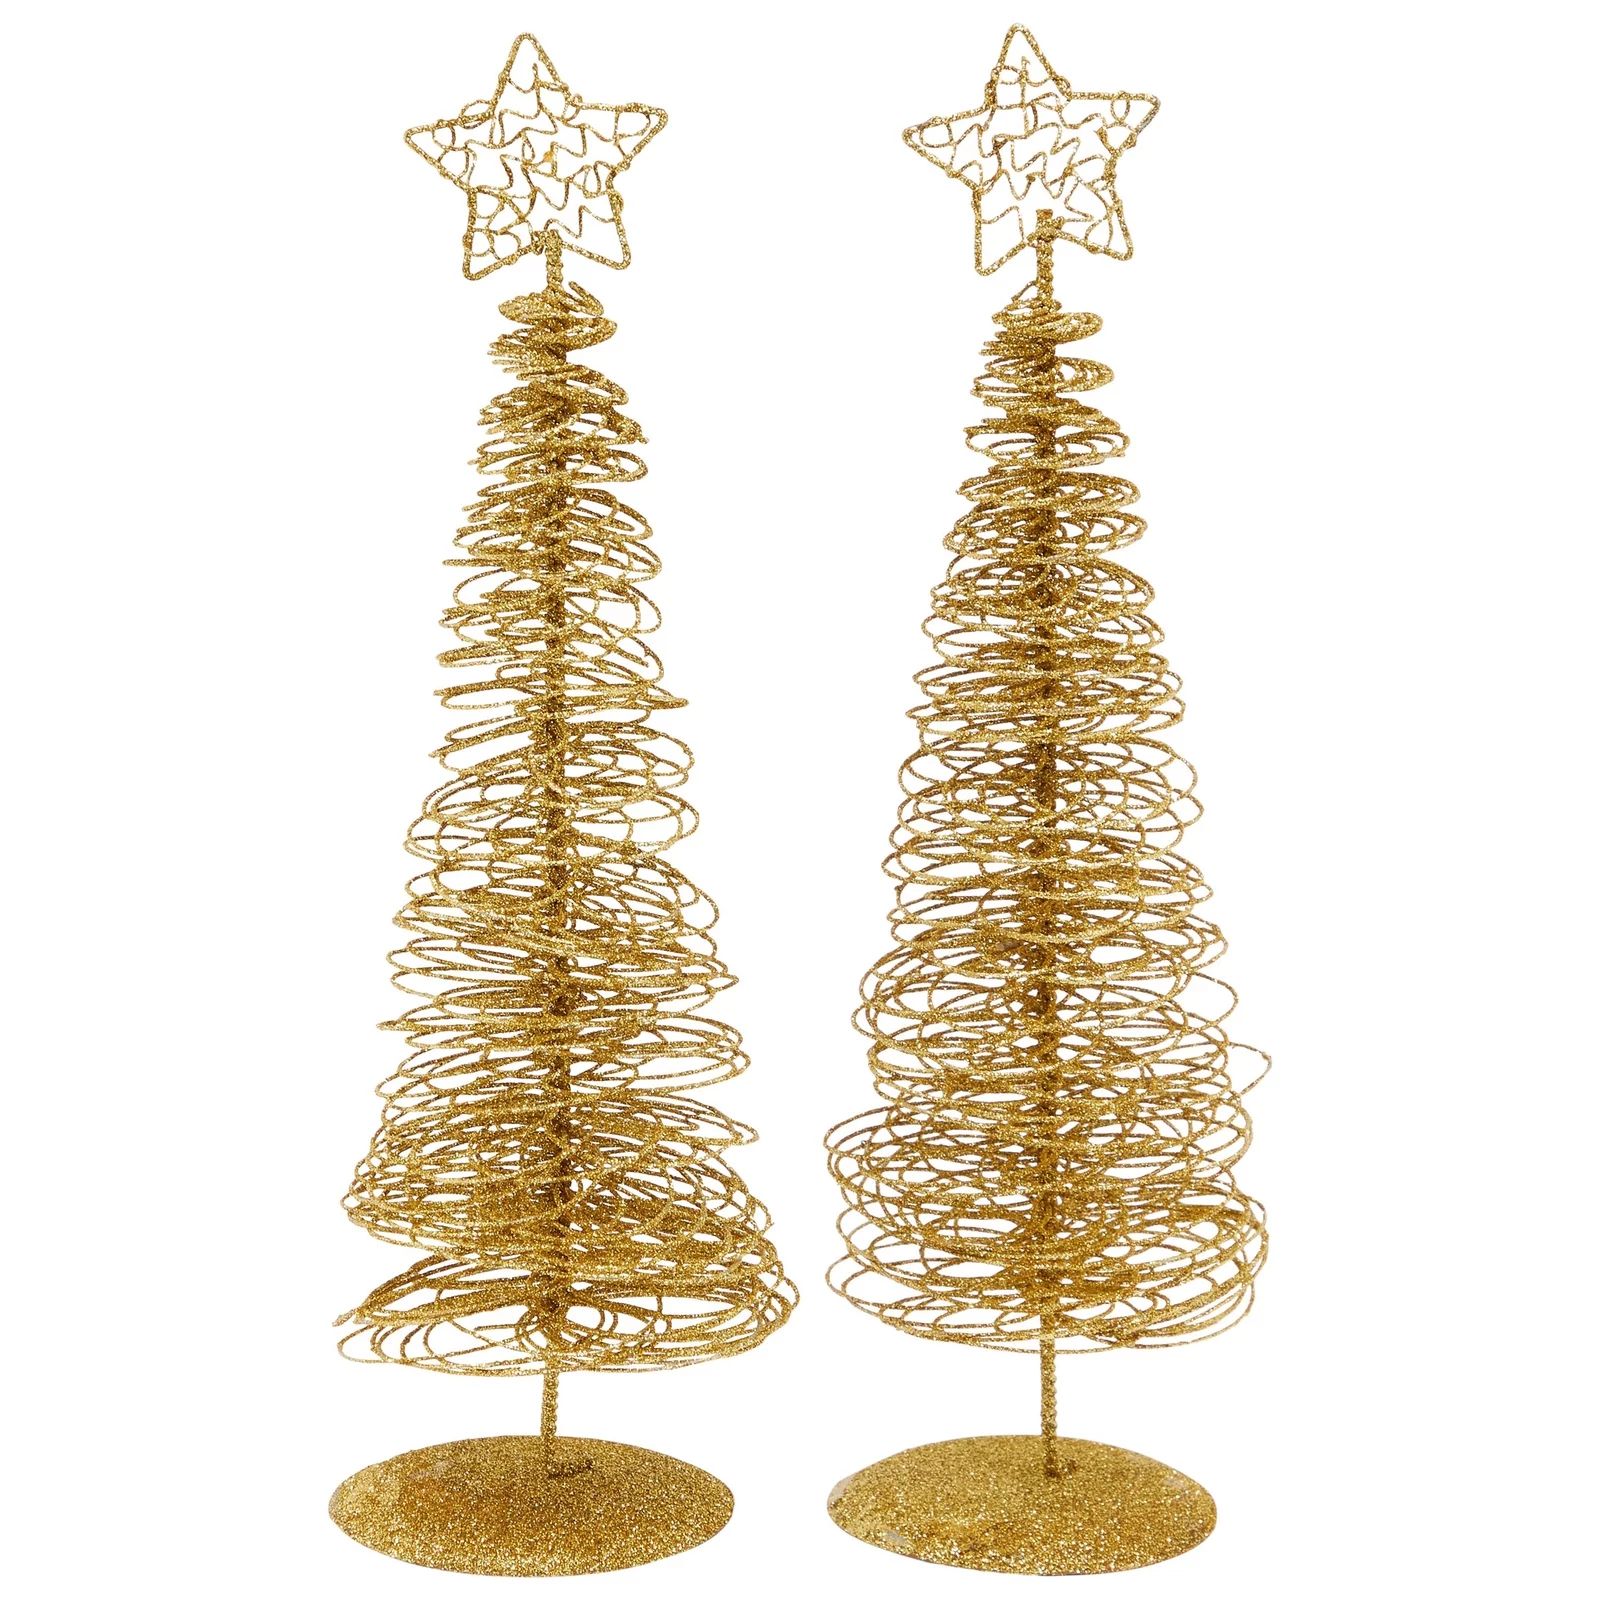 2 Pack Small Gold Christmas Tree Decorations for Table Top Holiday Decor (3 x 10.5 Inches) | Walmart (US)